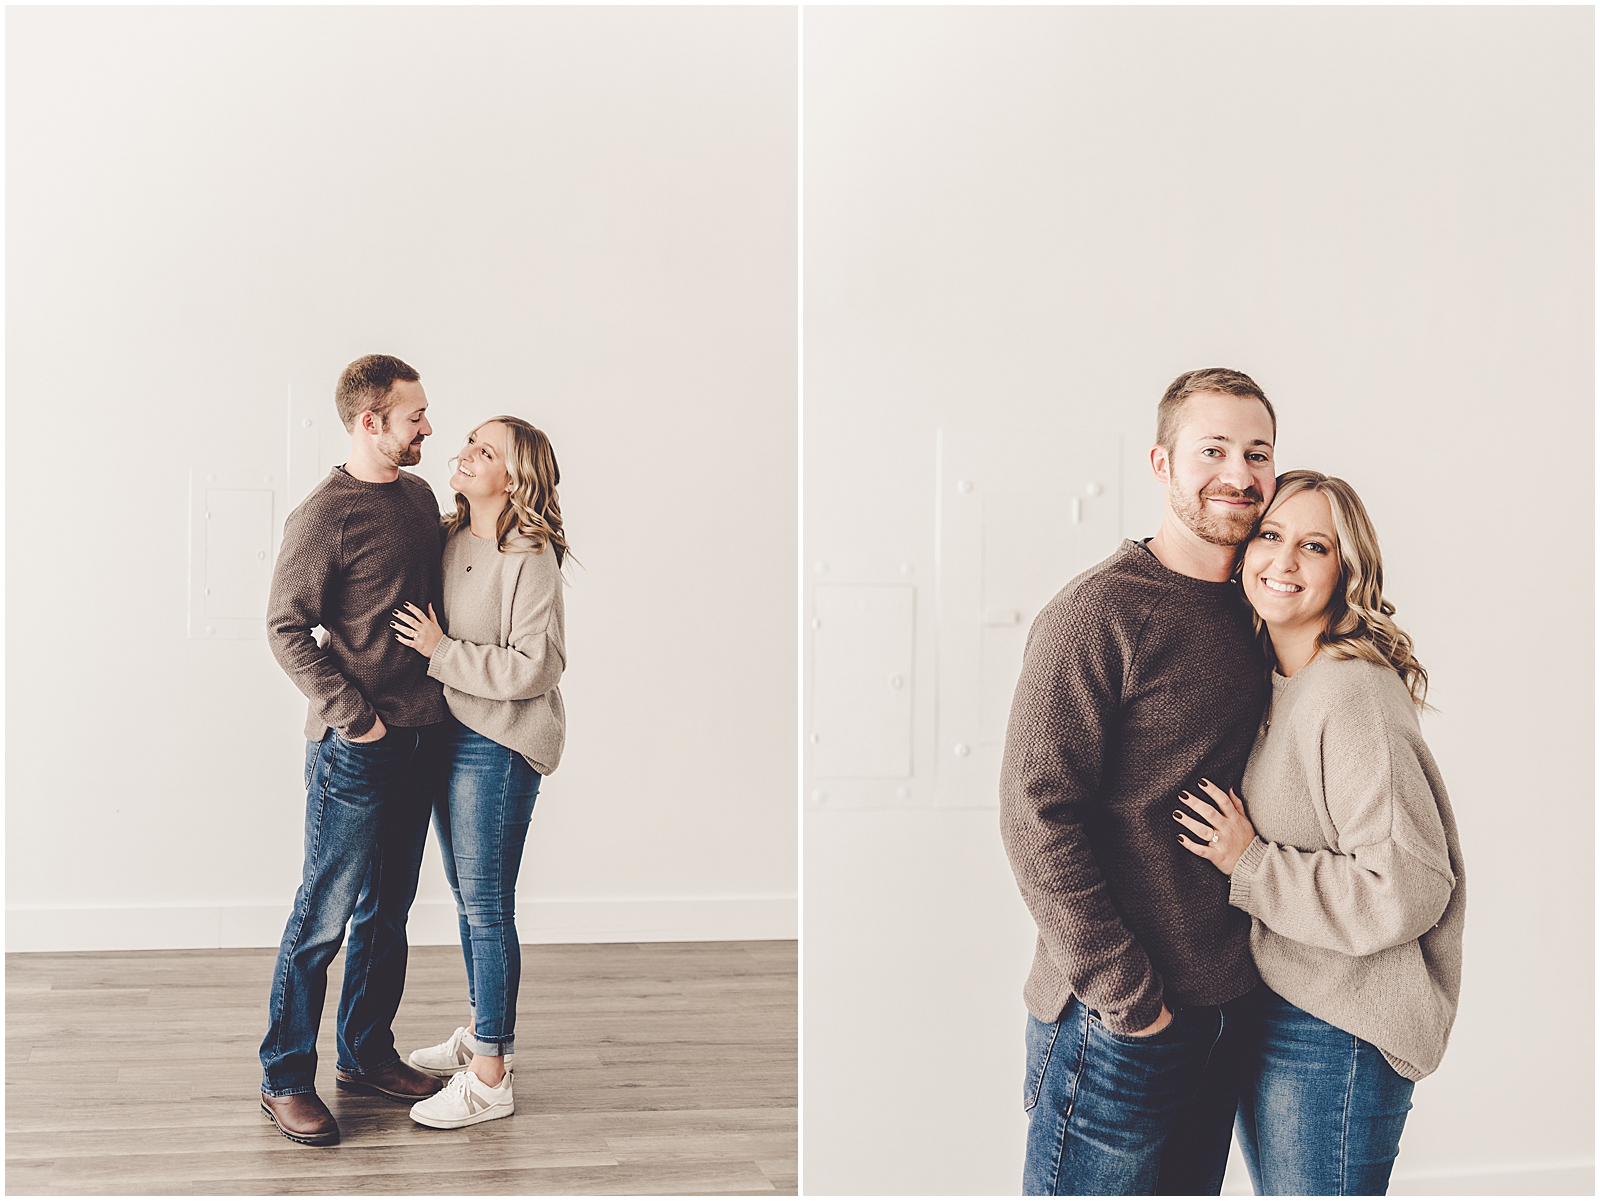 Abby and Max's studio and tree farm engagement photos in Kankakee, Illinois with Chicagoland wedding photographer Kara Evans Photographer.